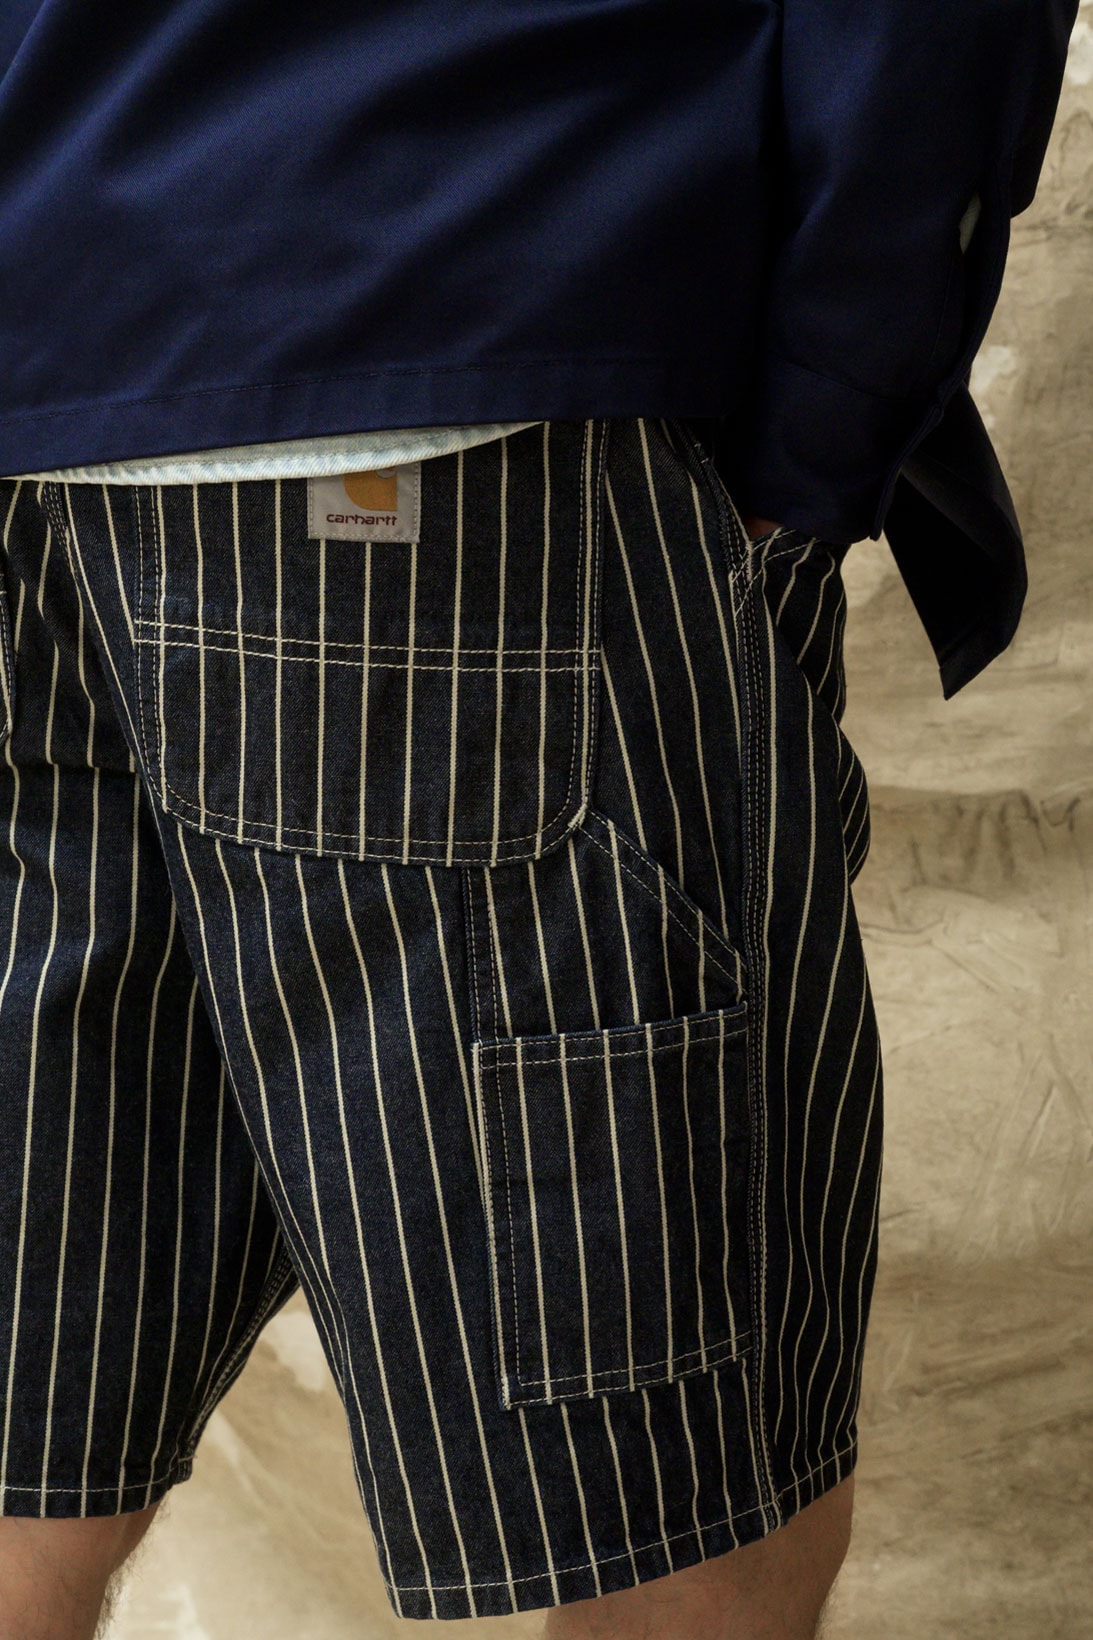 carhartt wip spring summer 2021 ss21 collection lookbook striped shorts